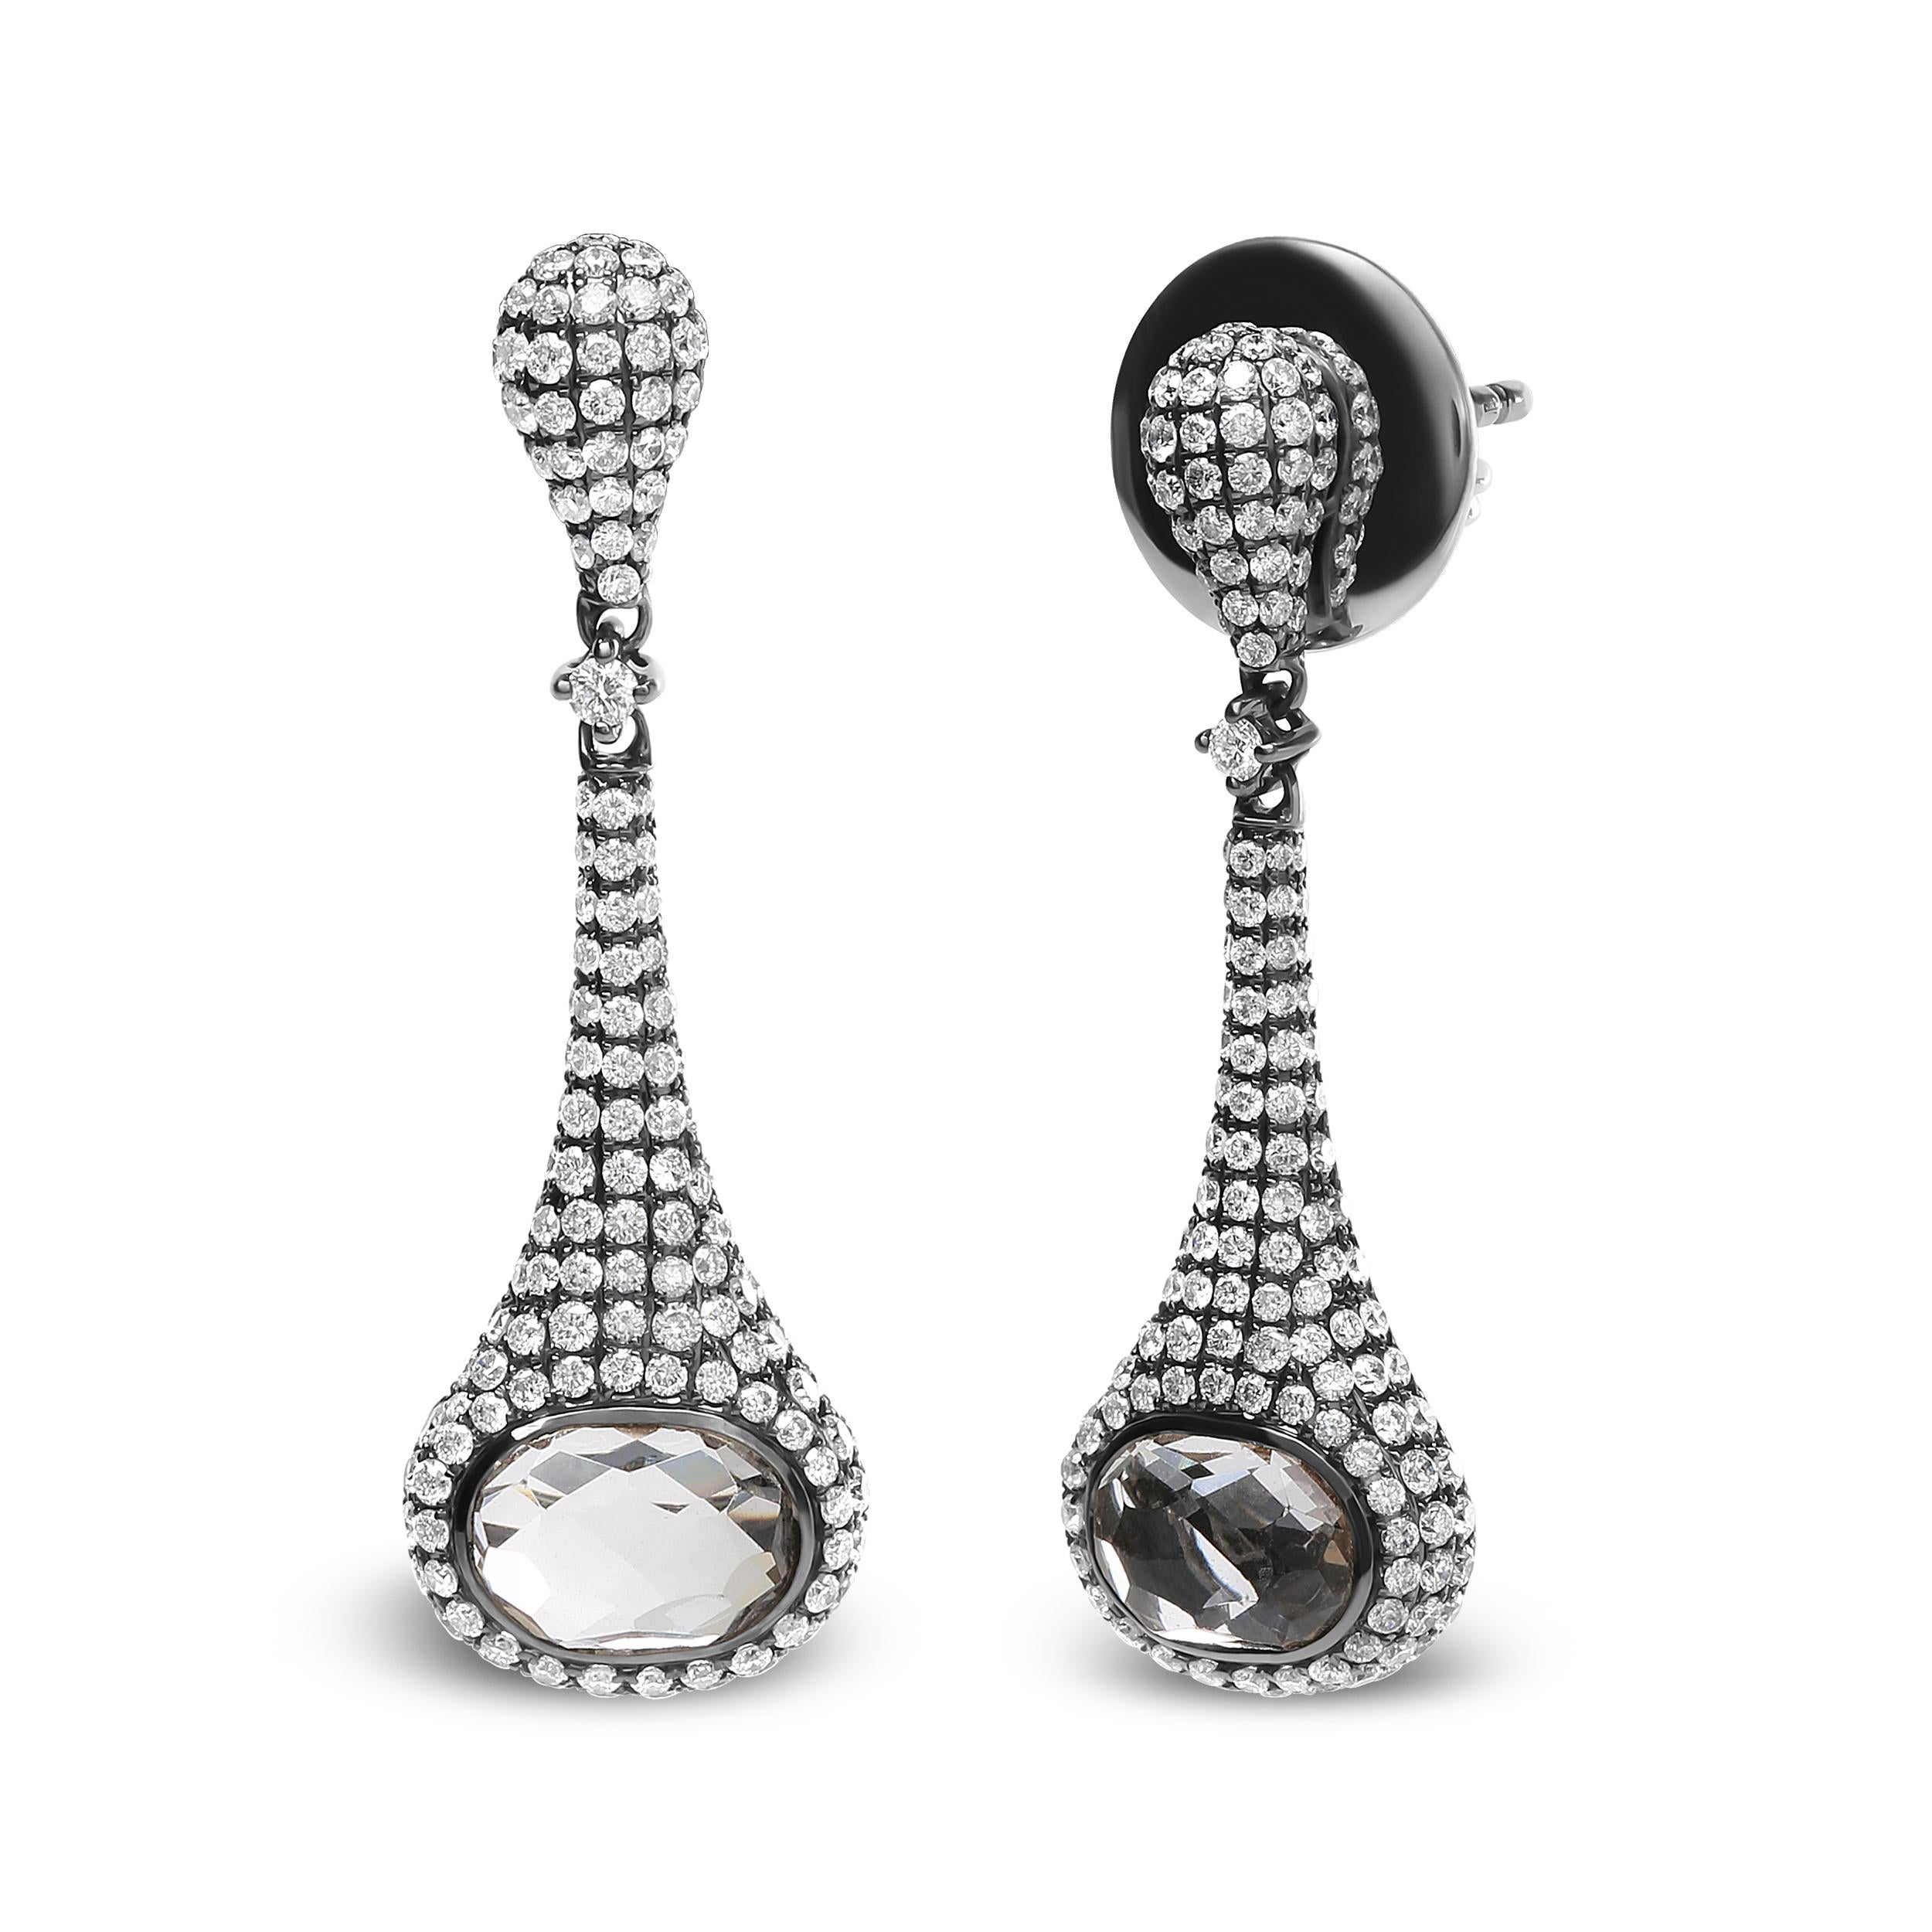 Dramatically glamorous, these dangle drop earrings make a magical accessory for your eveningwear attire or anytime you wish to make a statement. Made from black rhodium plated 18k white gold, this pair stuns in 346 total diamonds set carefully